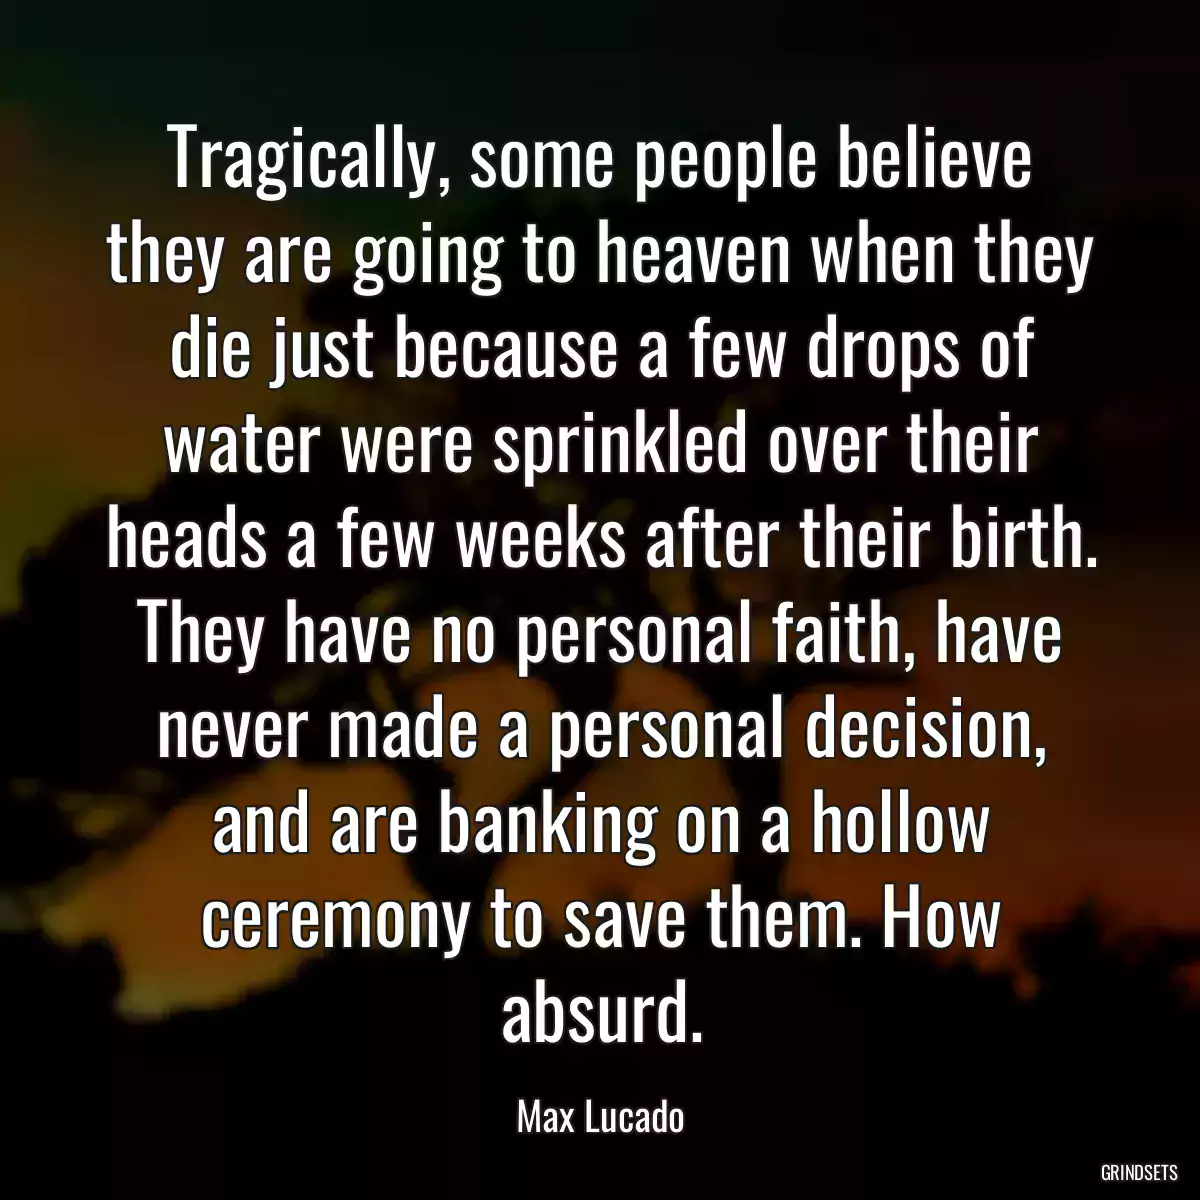 Tragically, some people believe they are going to heaven when they die just because a few drops of water were sprinkled over their heads a few weeks after their birth. They have no personal faith, have never made a personal decision, and are banking on a hollow ceremony to save them. How absurd.